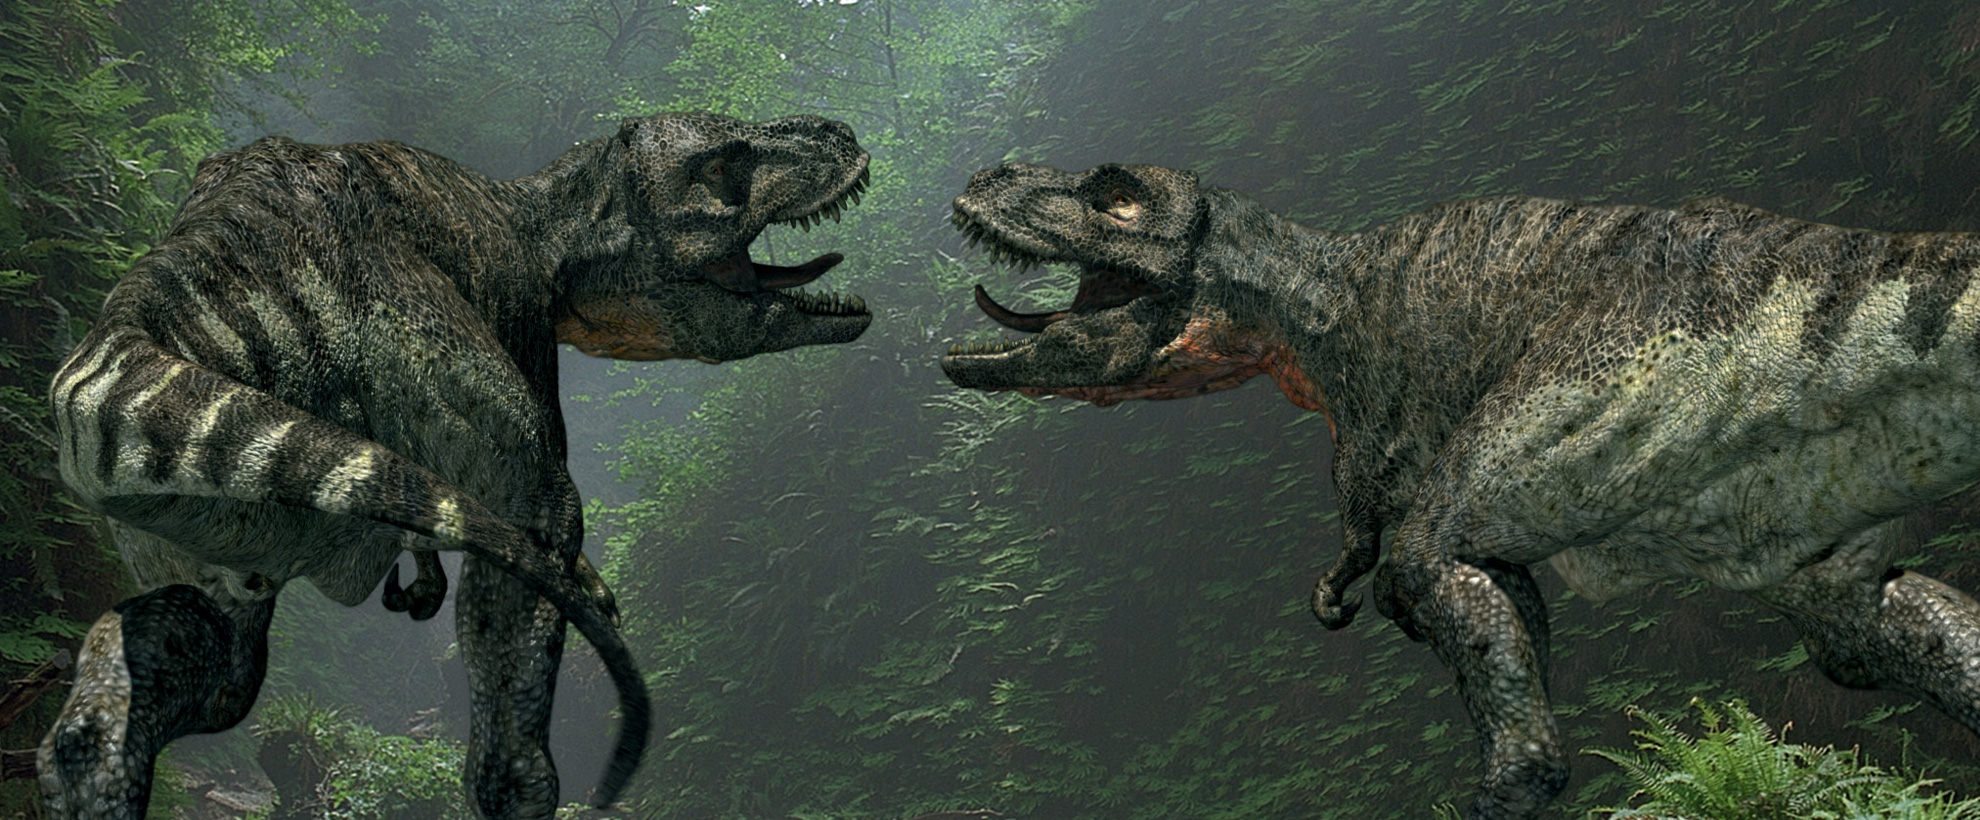 Two t-rexes snarl at each other 